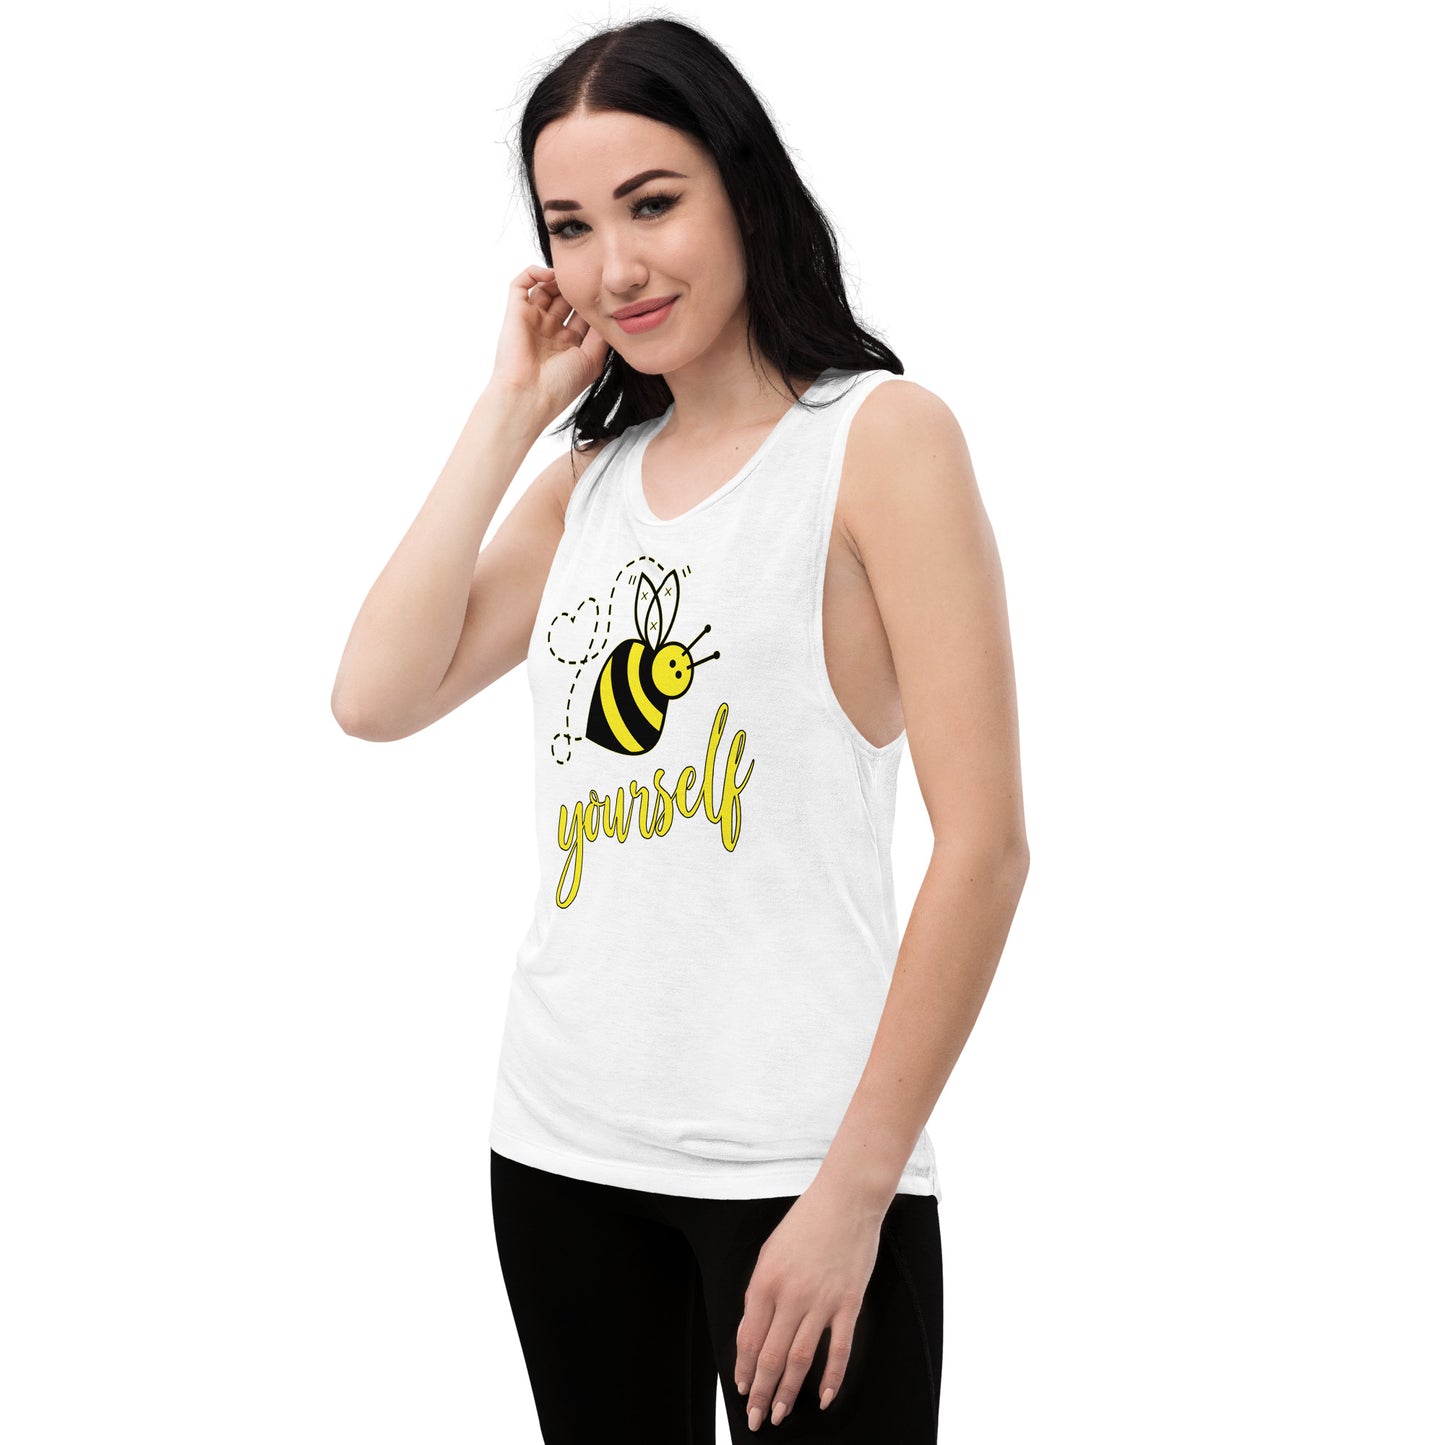 Bee Yourself Ladies’ Muscle Tank